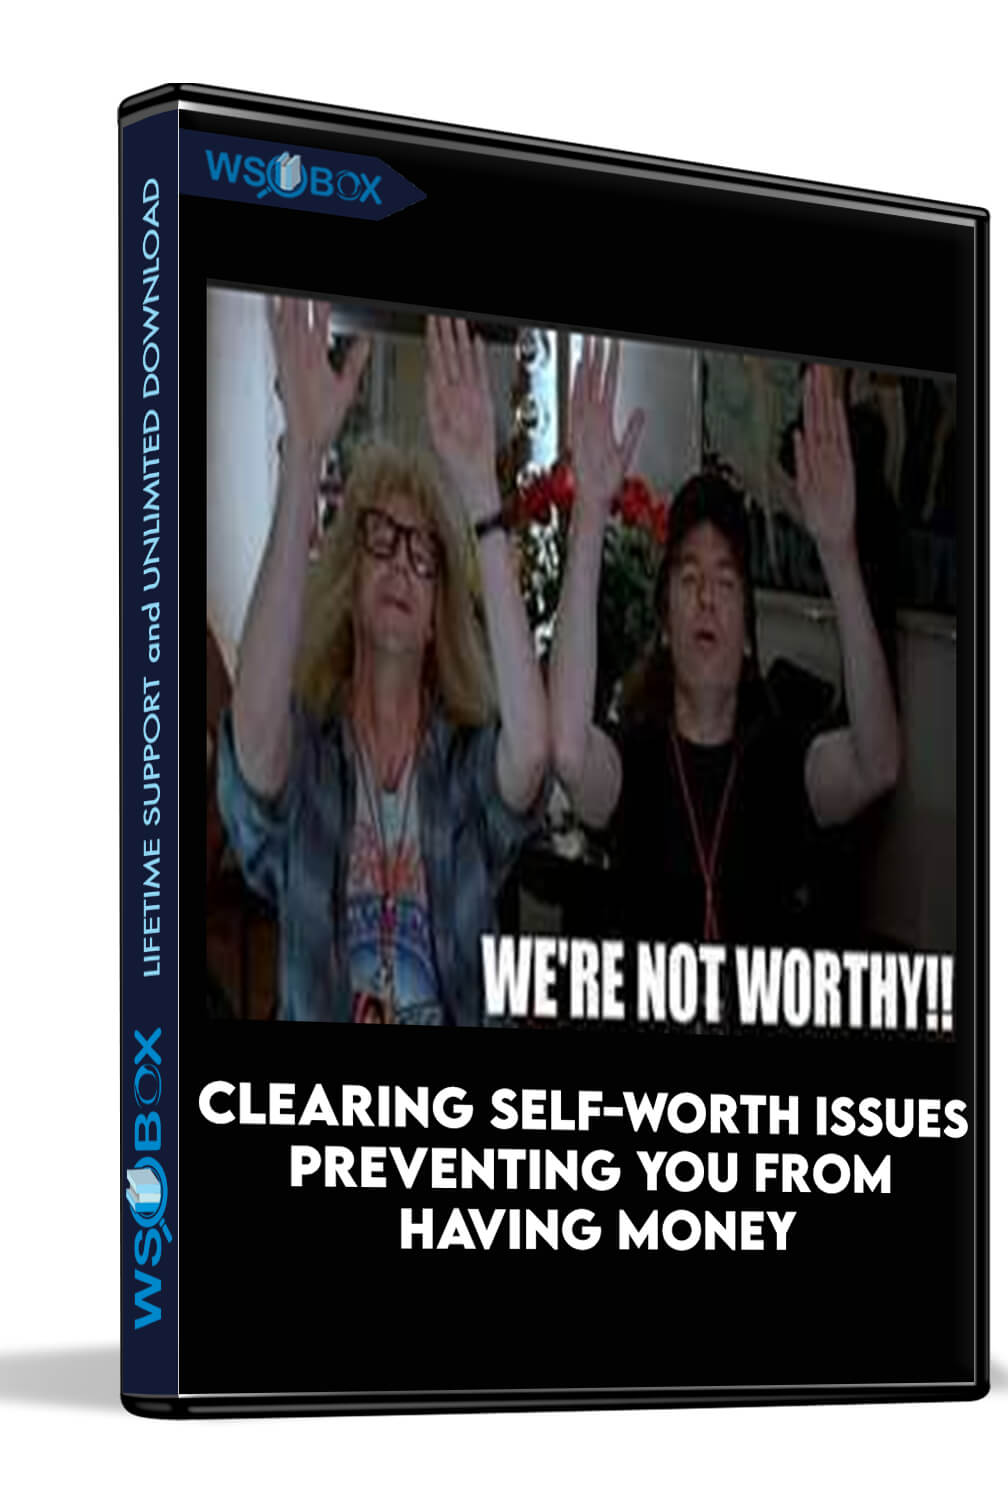 Clearing Self-Worth Issues Preventing You From Having Money